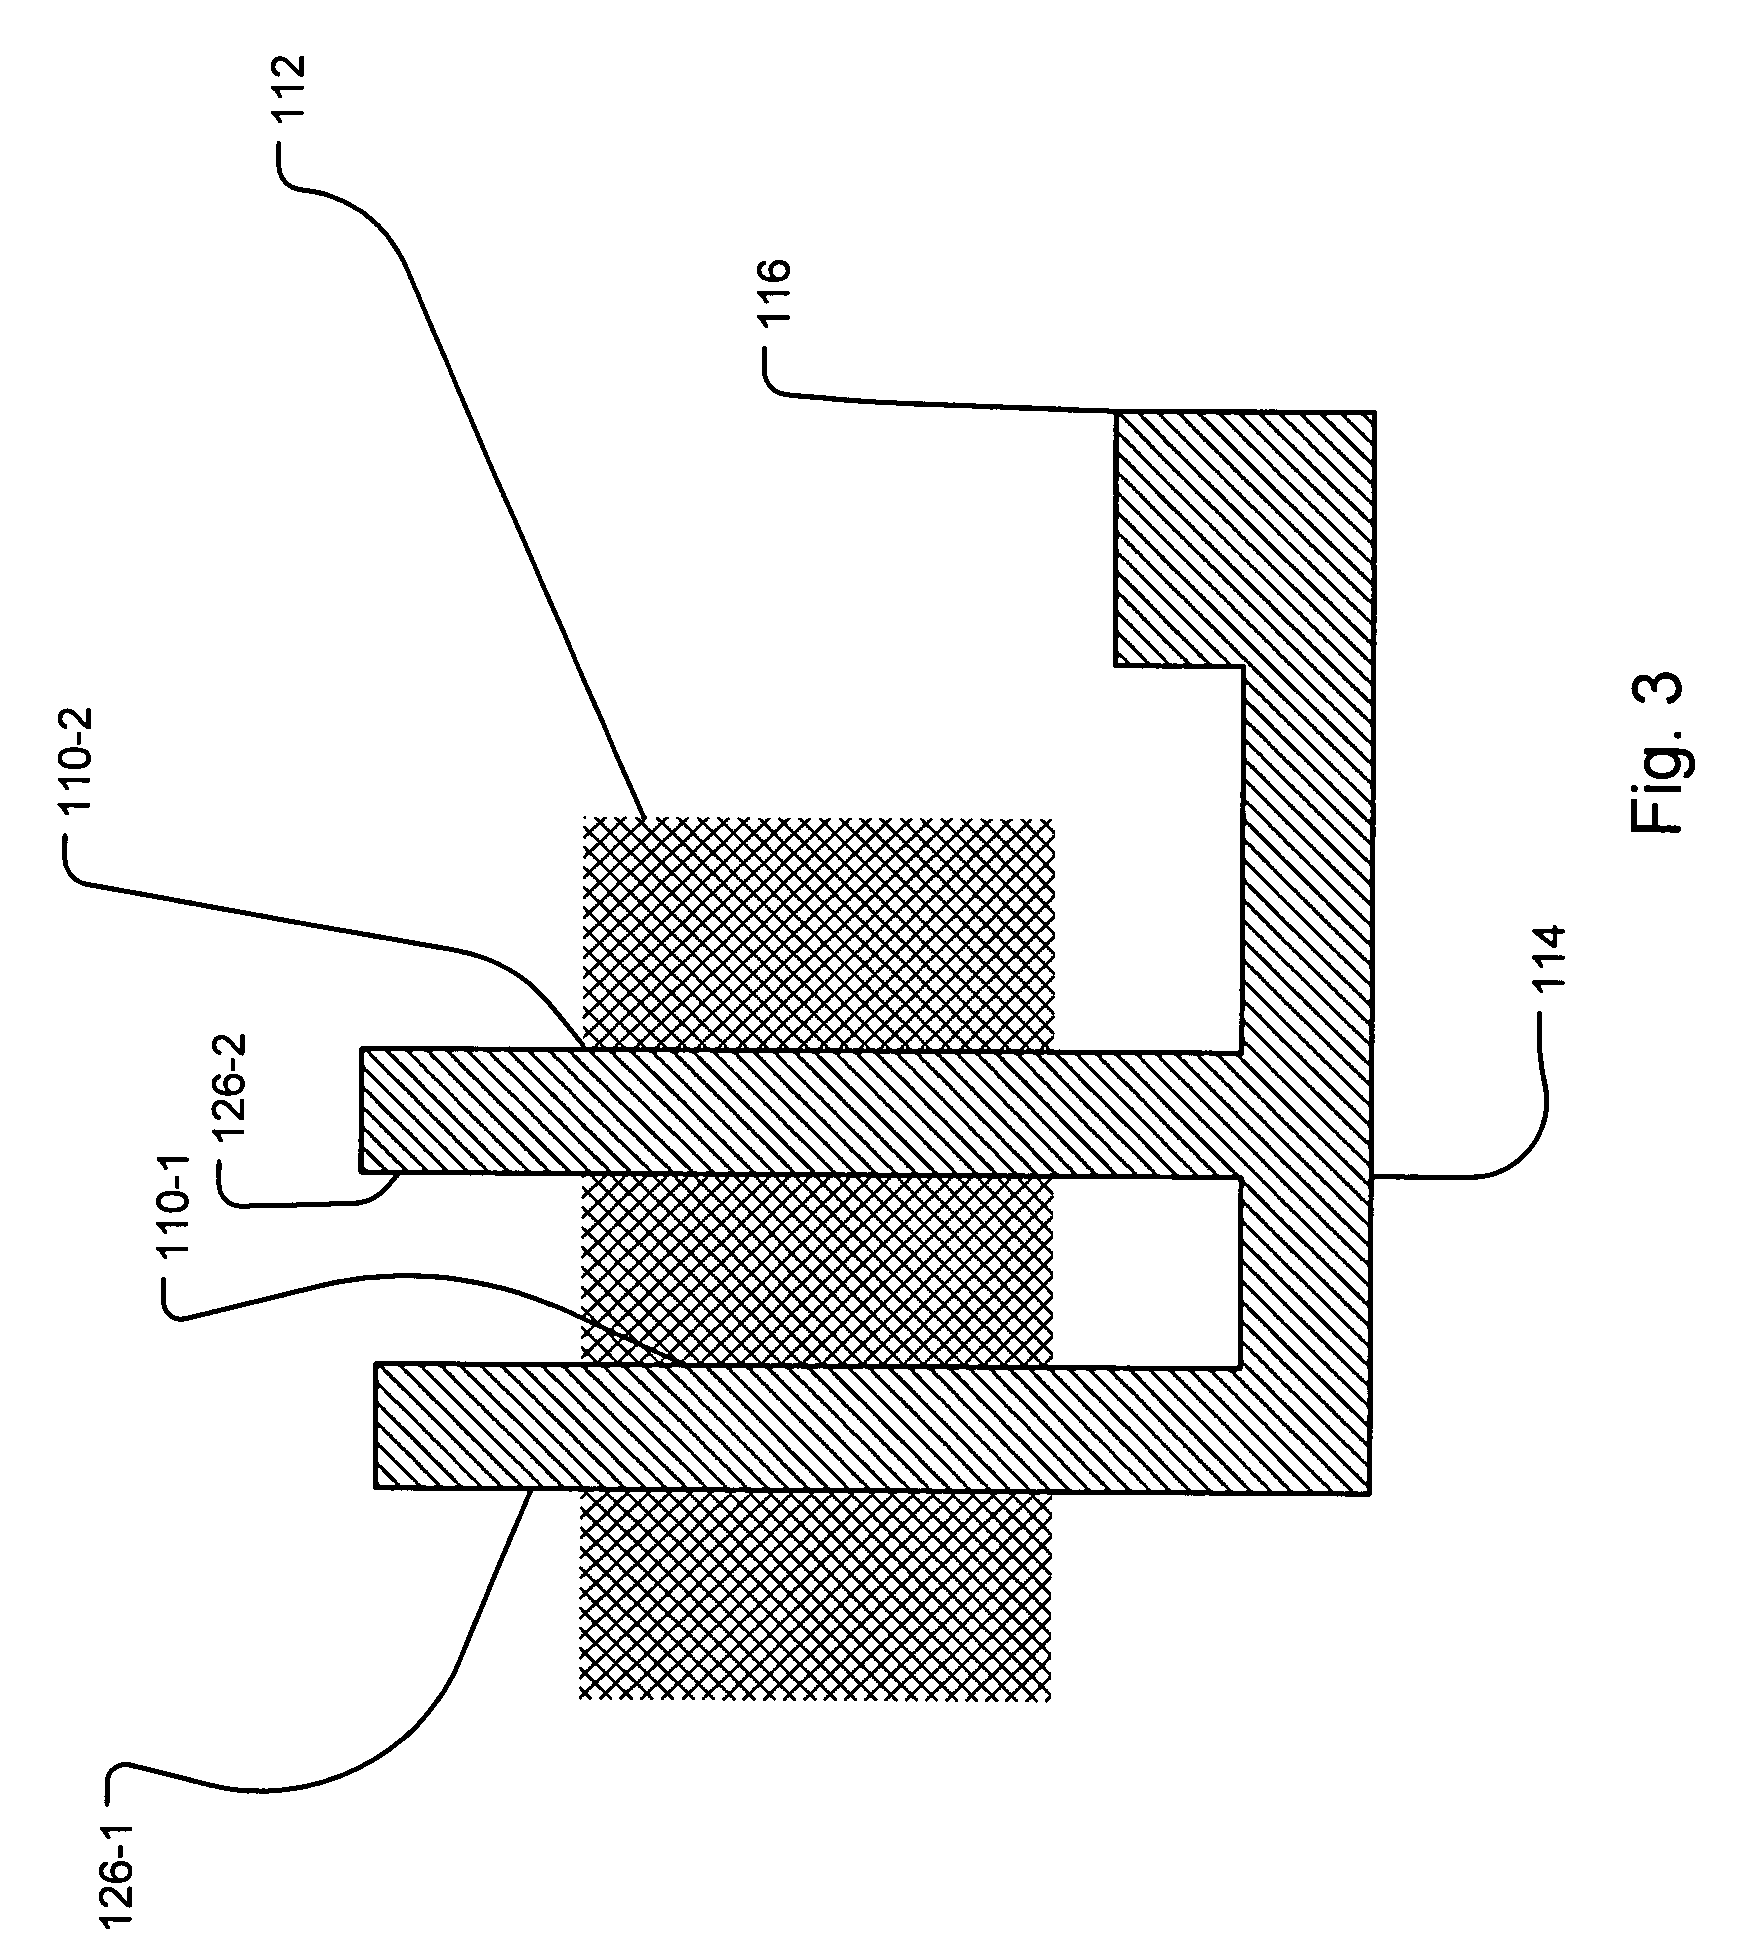 Method and system for managing design corrections for optical and process effects based on feature tolerances